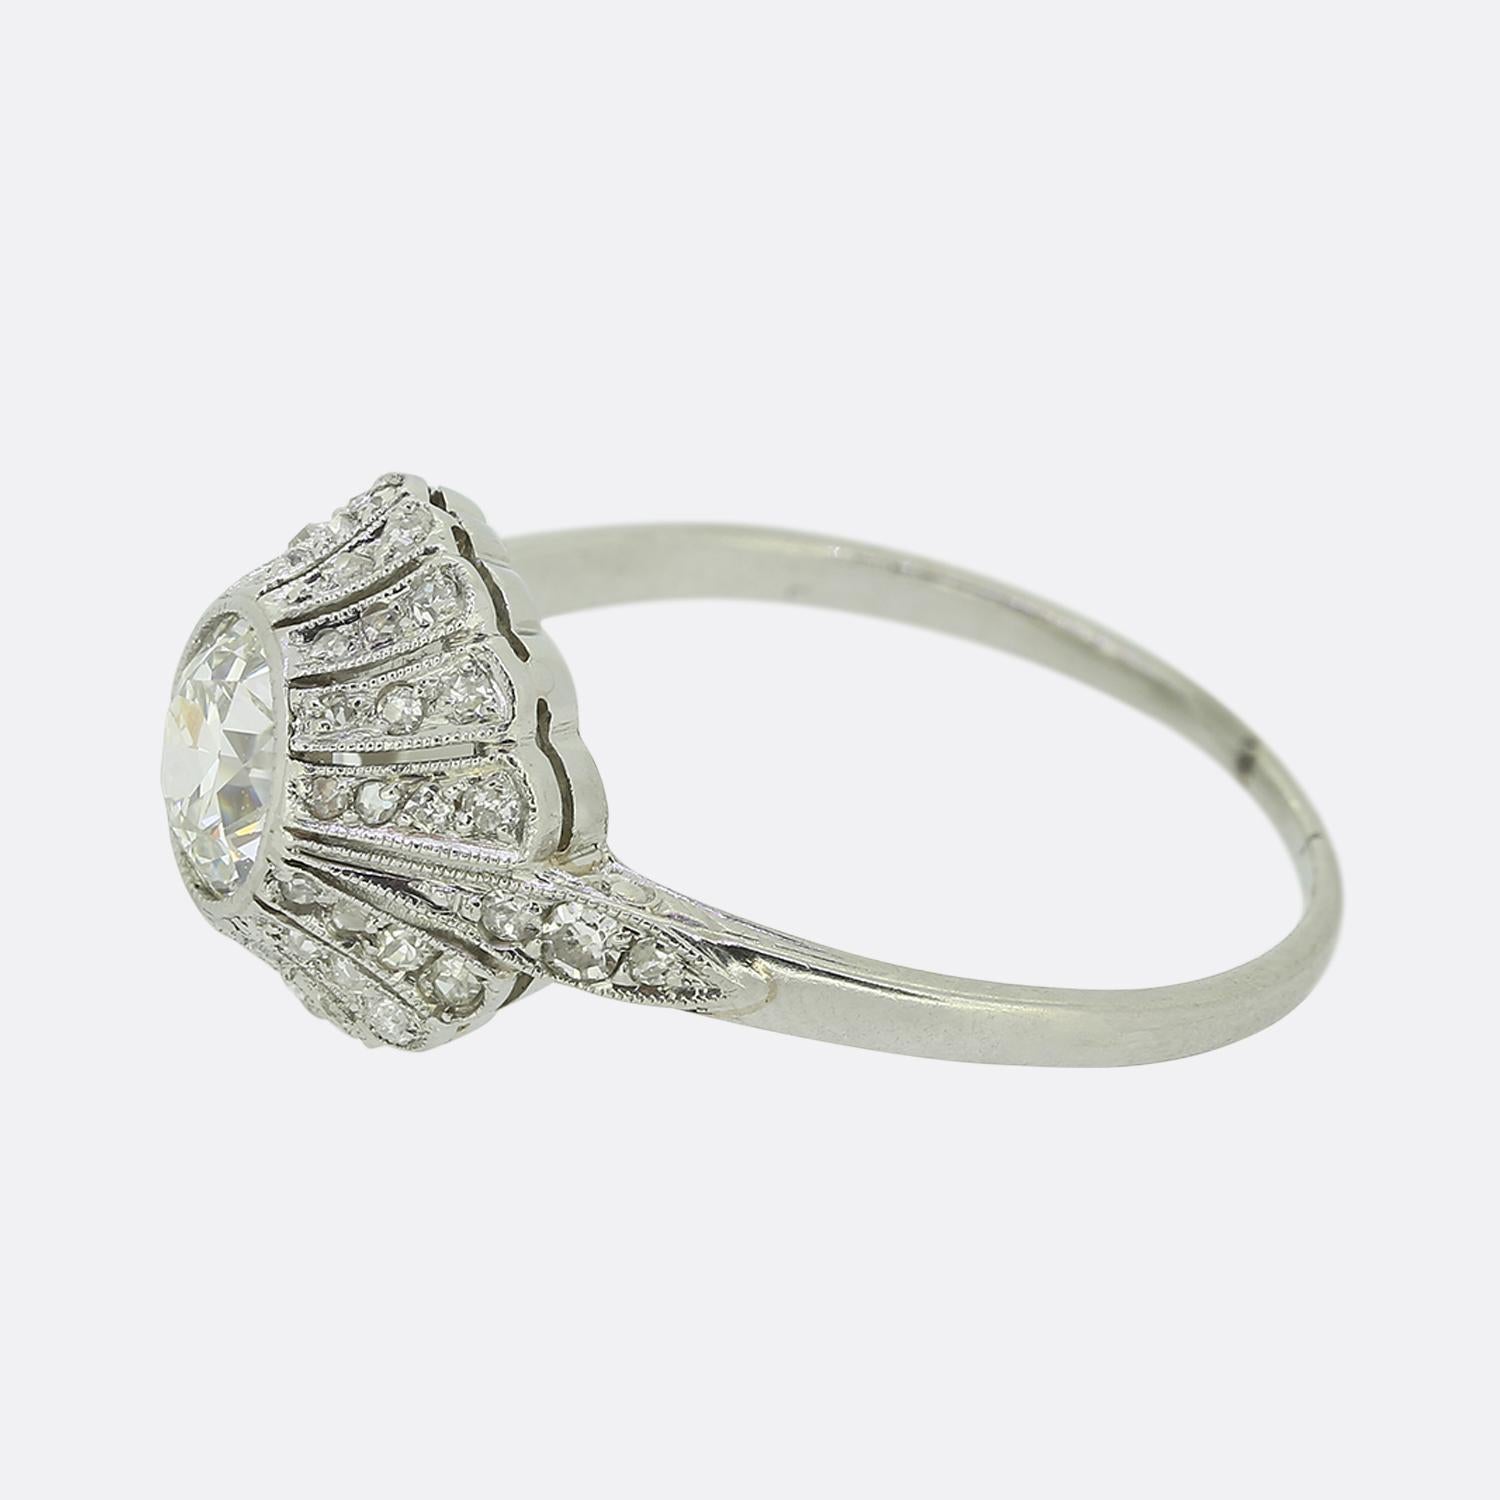 Here we have a charming diamond engagement ring crafted during the pinnacle of the Art Deco movement. This elegant piece showcases an impressive bright white round faceted old European cut diamond at the centre of the face. This principal stone sits